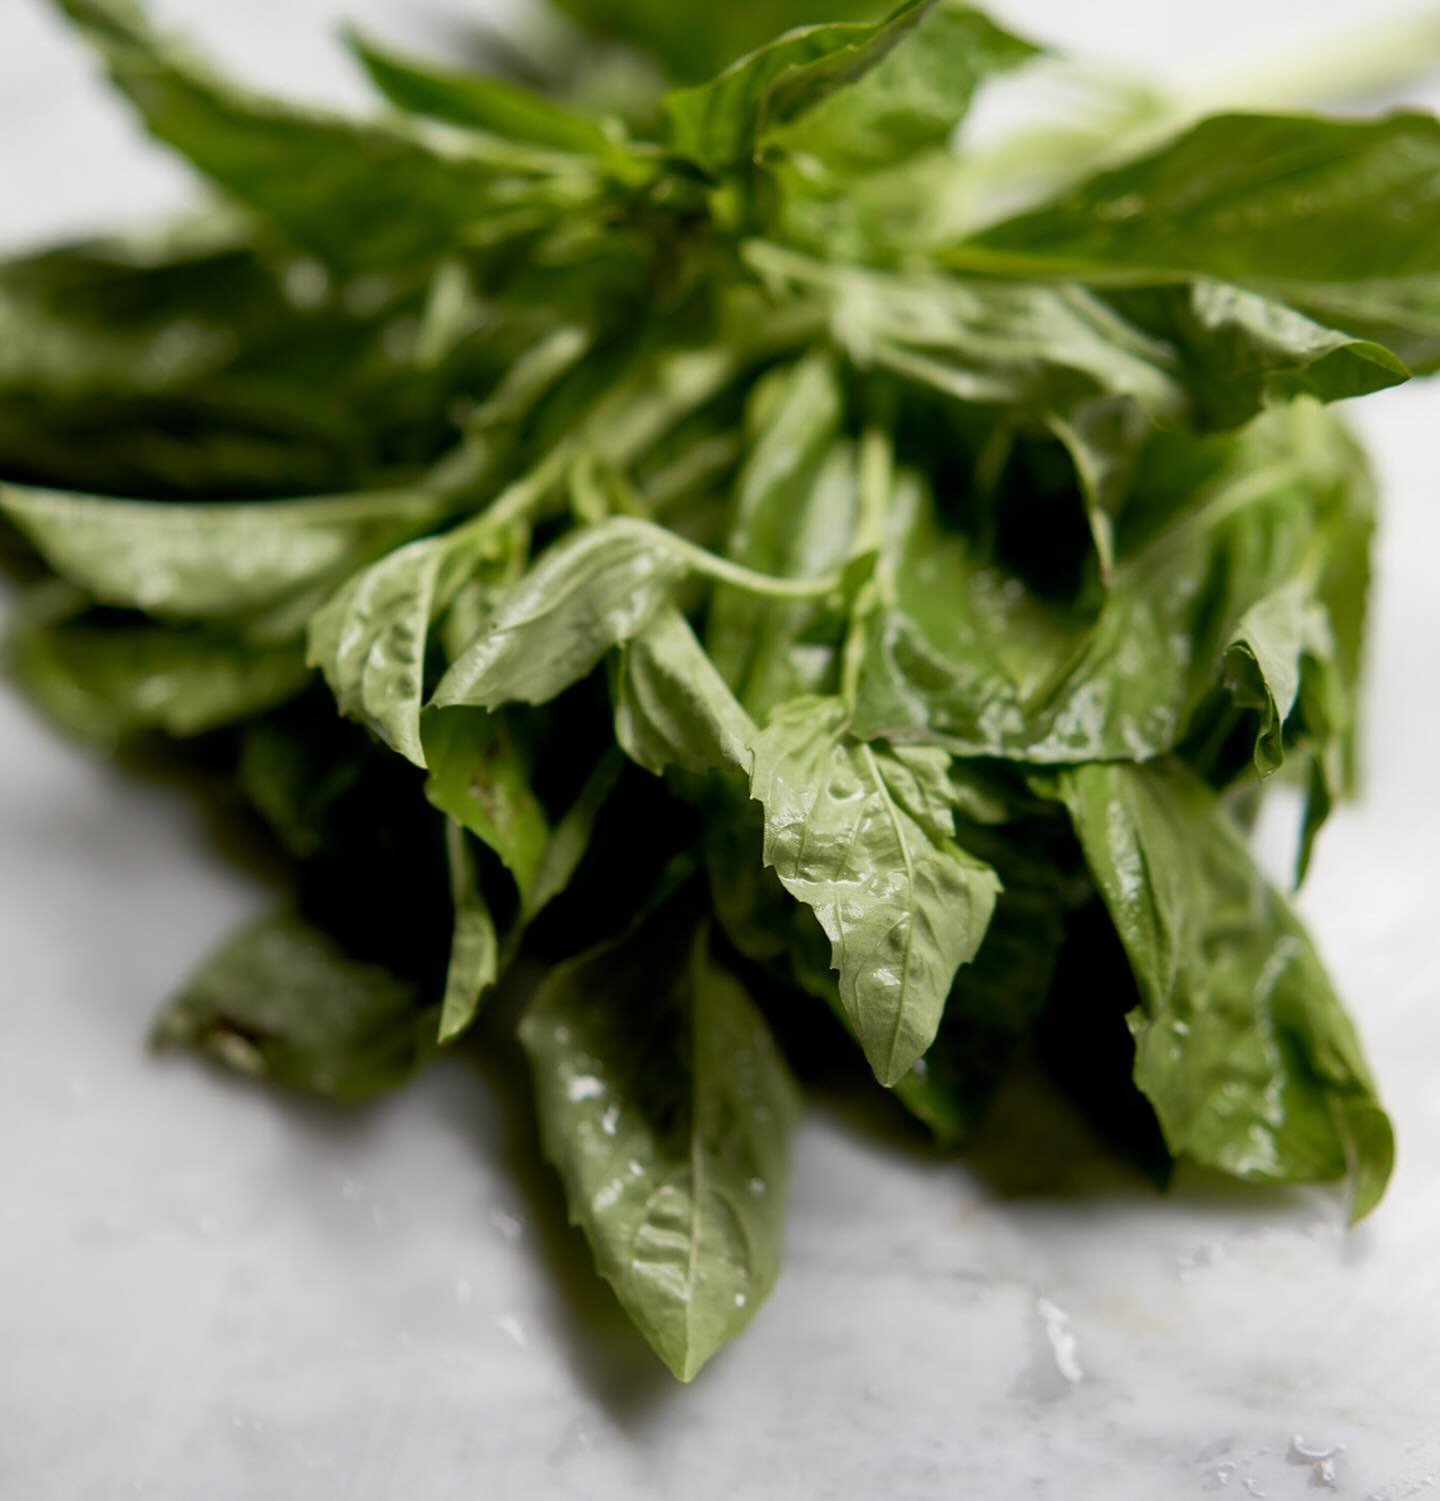 The secret of our Pesto &amp; Percorino pizza? As always: the quality of the ingredients: we carefully choose the best basil we can find to make our pesto.

Hit: for pesto, always prefer the small-leaves, not too minty one for exceptional flavor!

#b